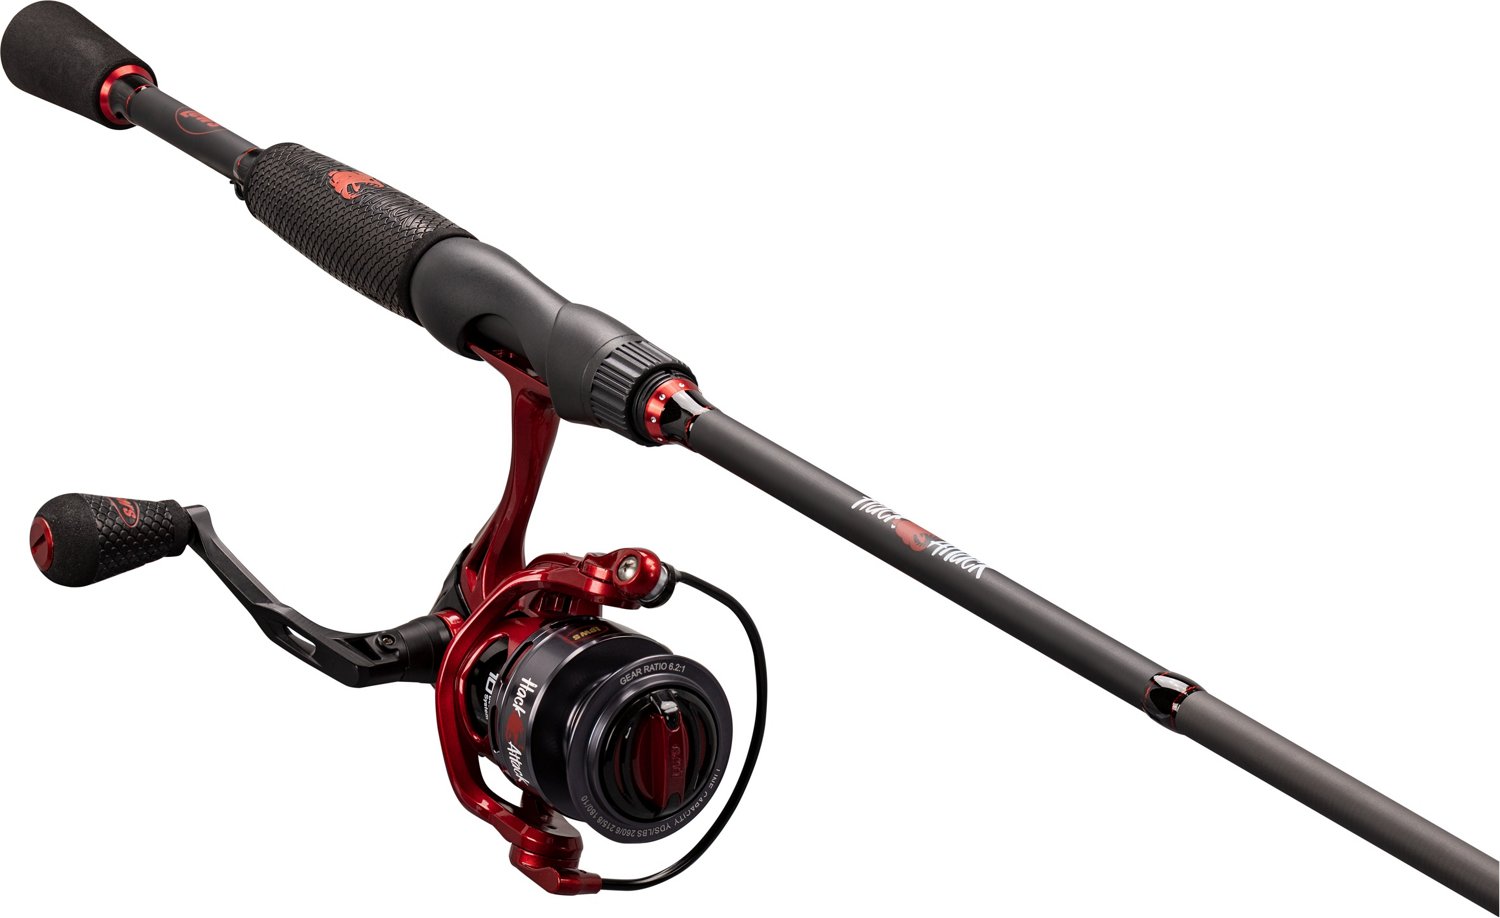 Palm fishing ROPHAL Spinning Rod and Reel Combos - Carbon Fiber